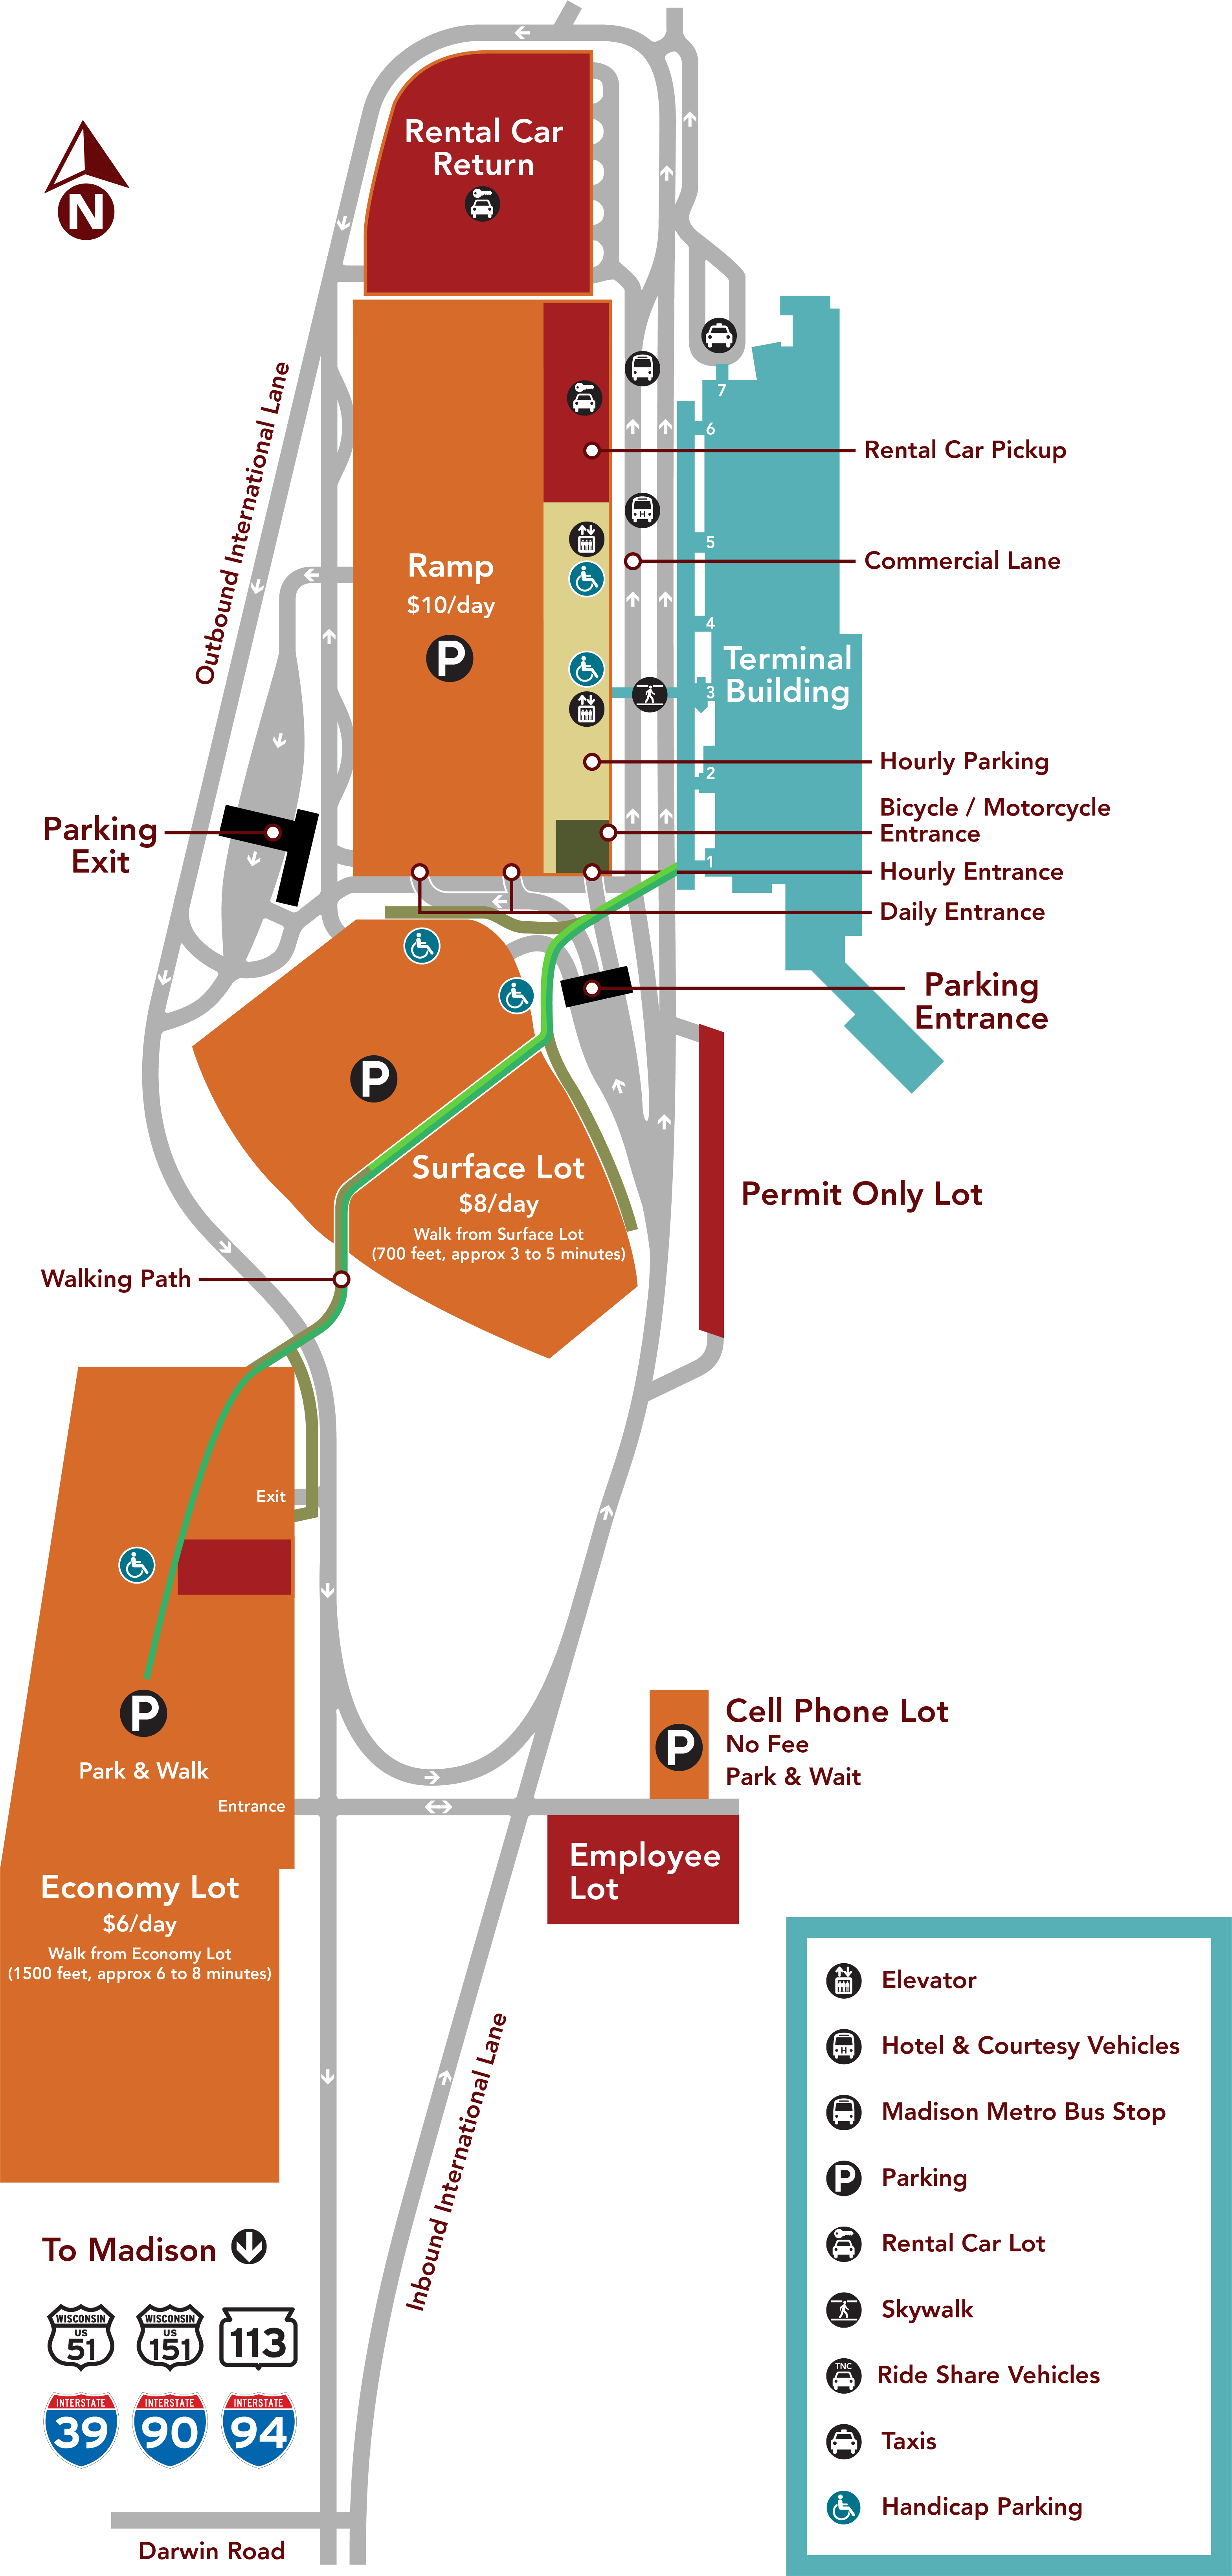 Parking Area Map